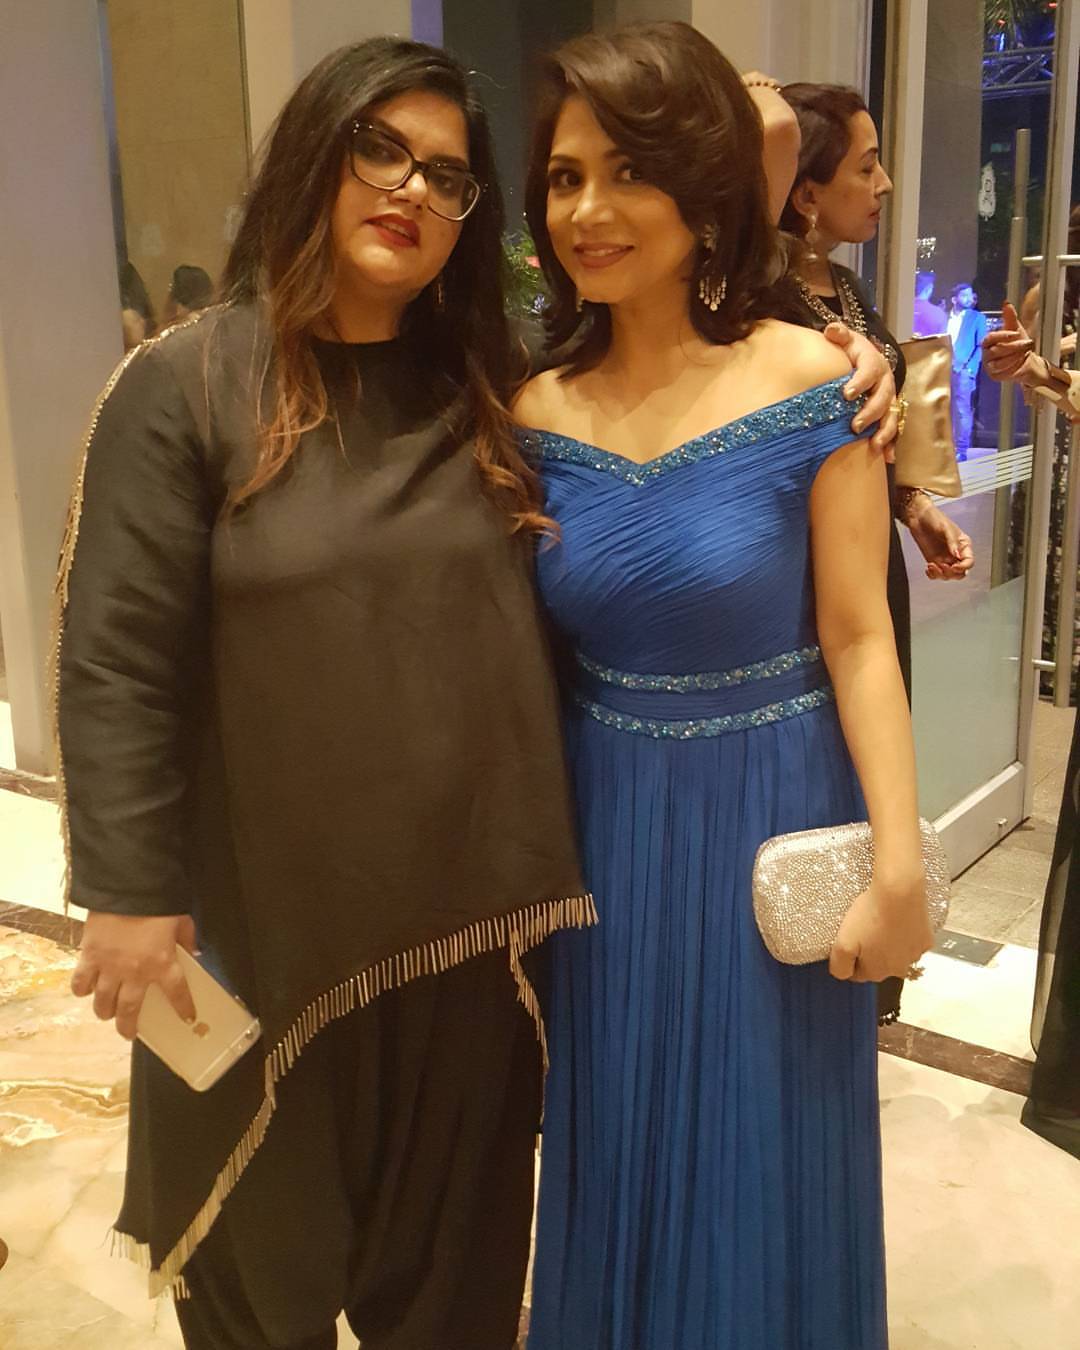 With the Editor and Chief Community Officer, Femina at NYFB Awards – 2017